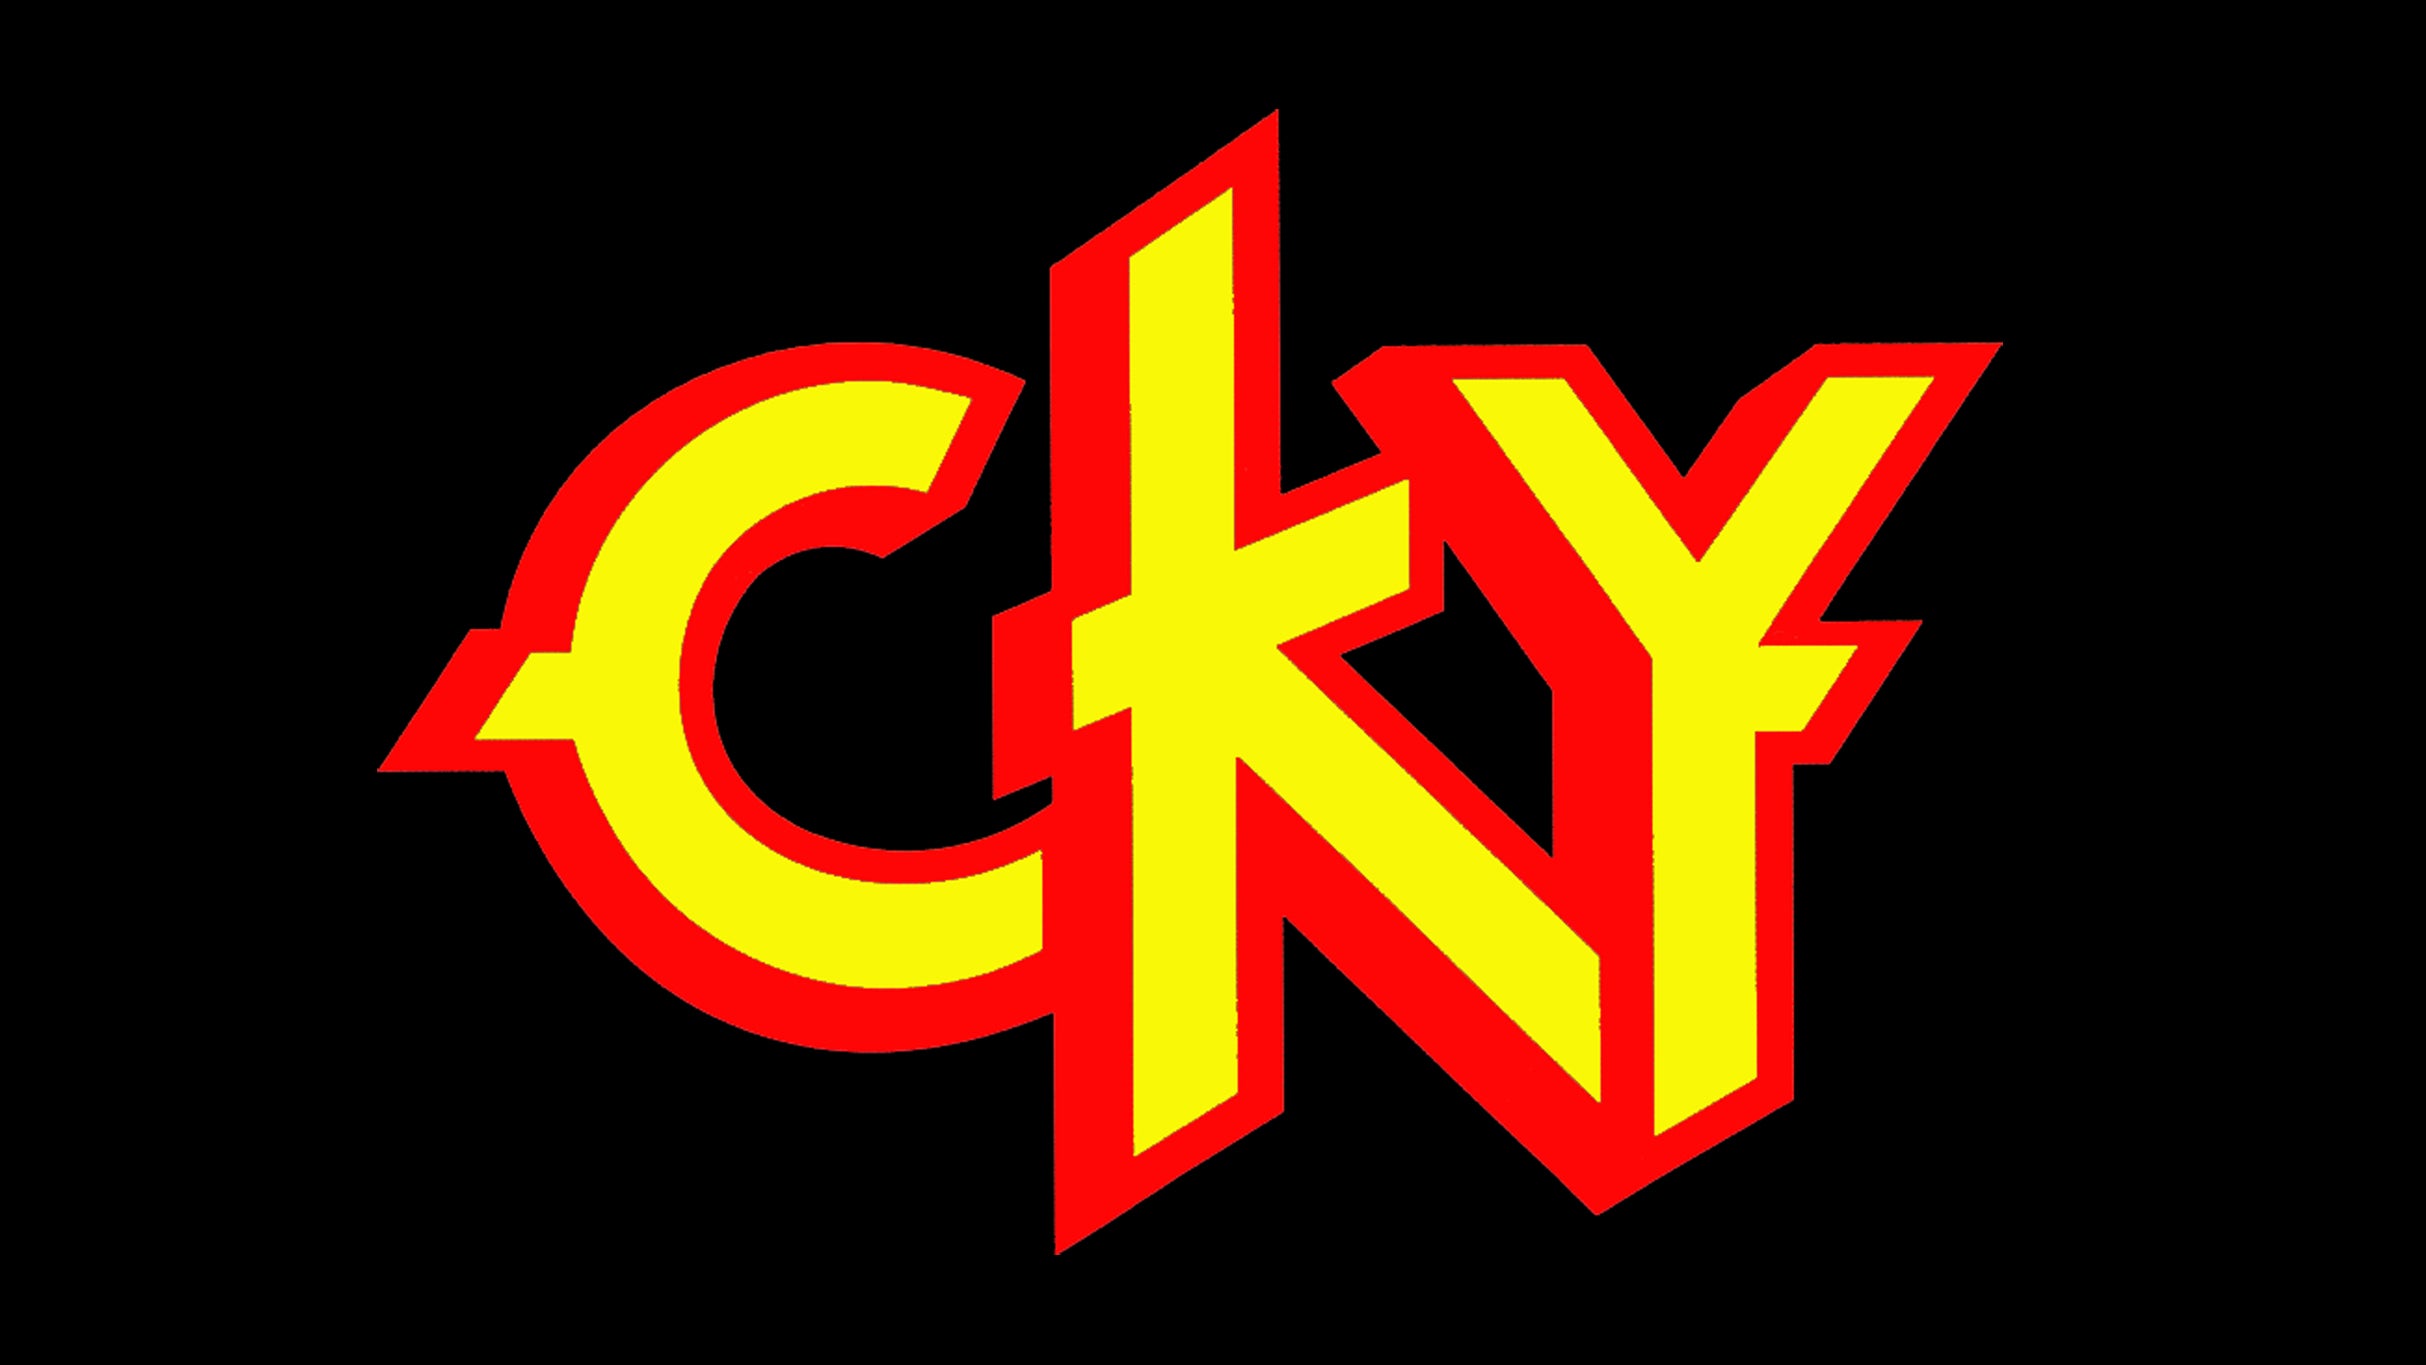 CKY w/ Special Guests Crobot & X-Cops at Music Farm